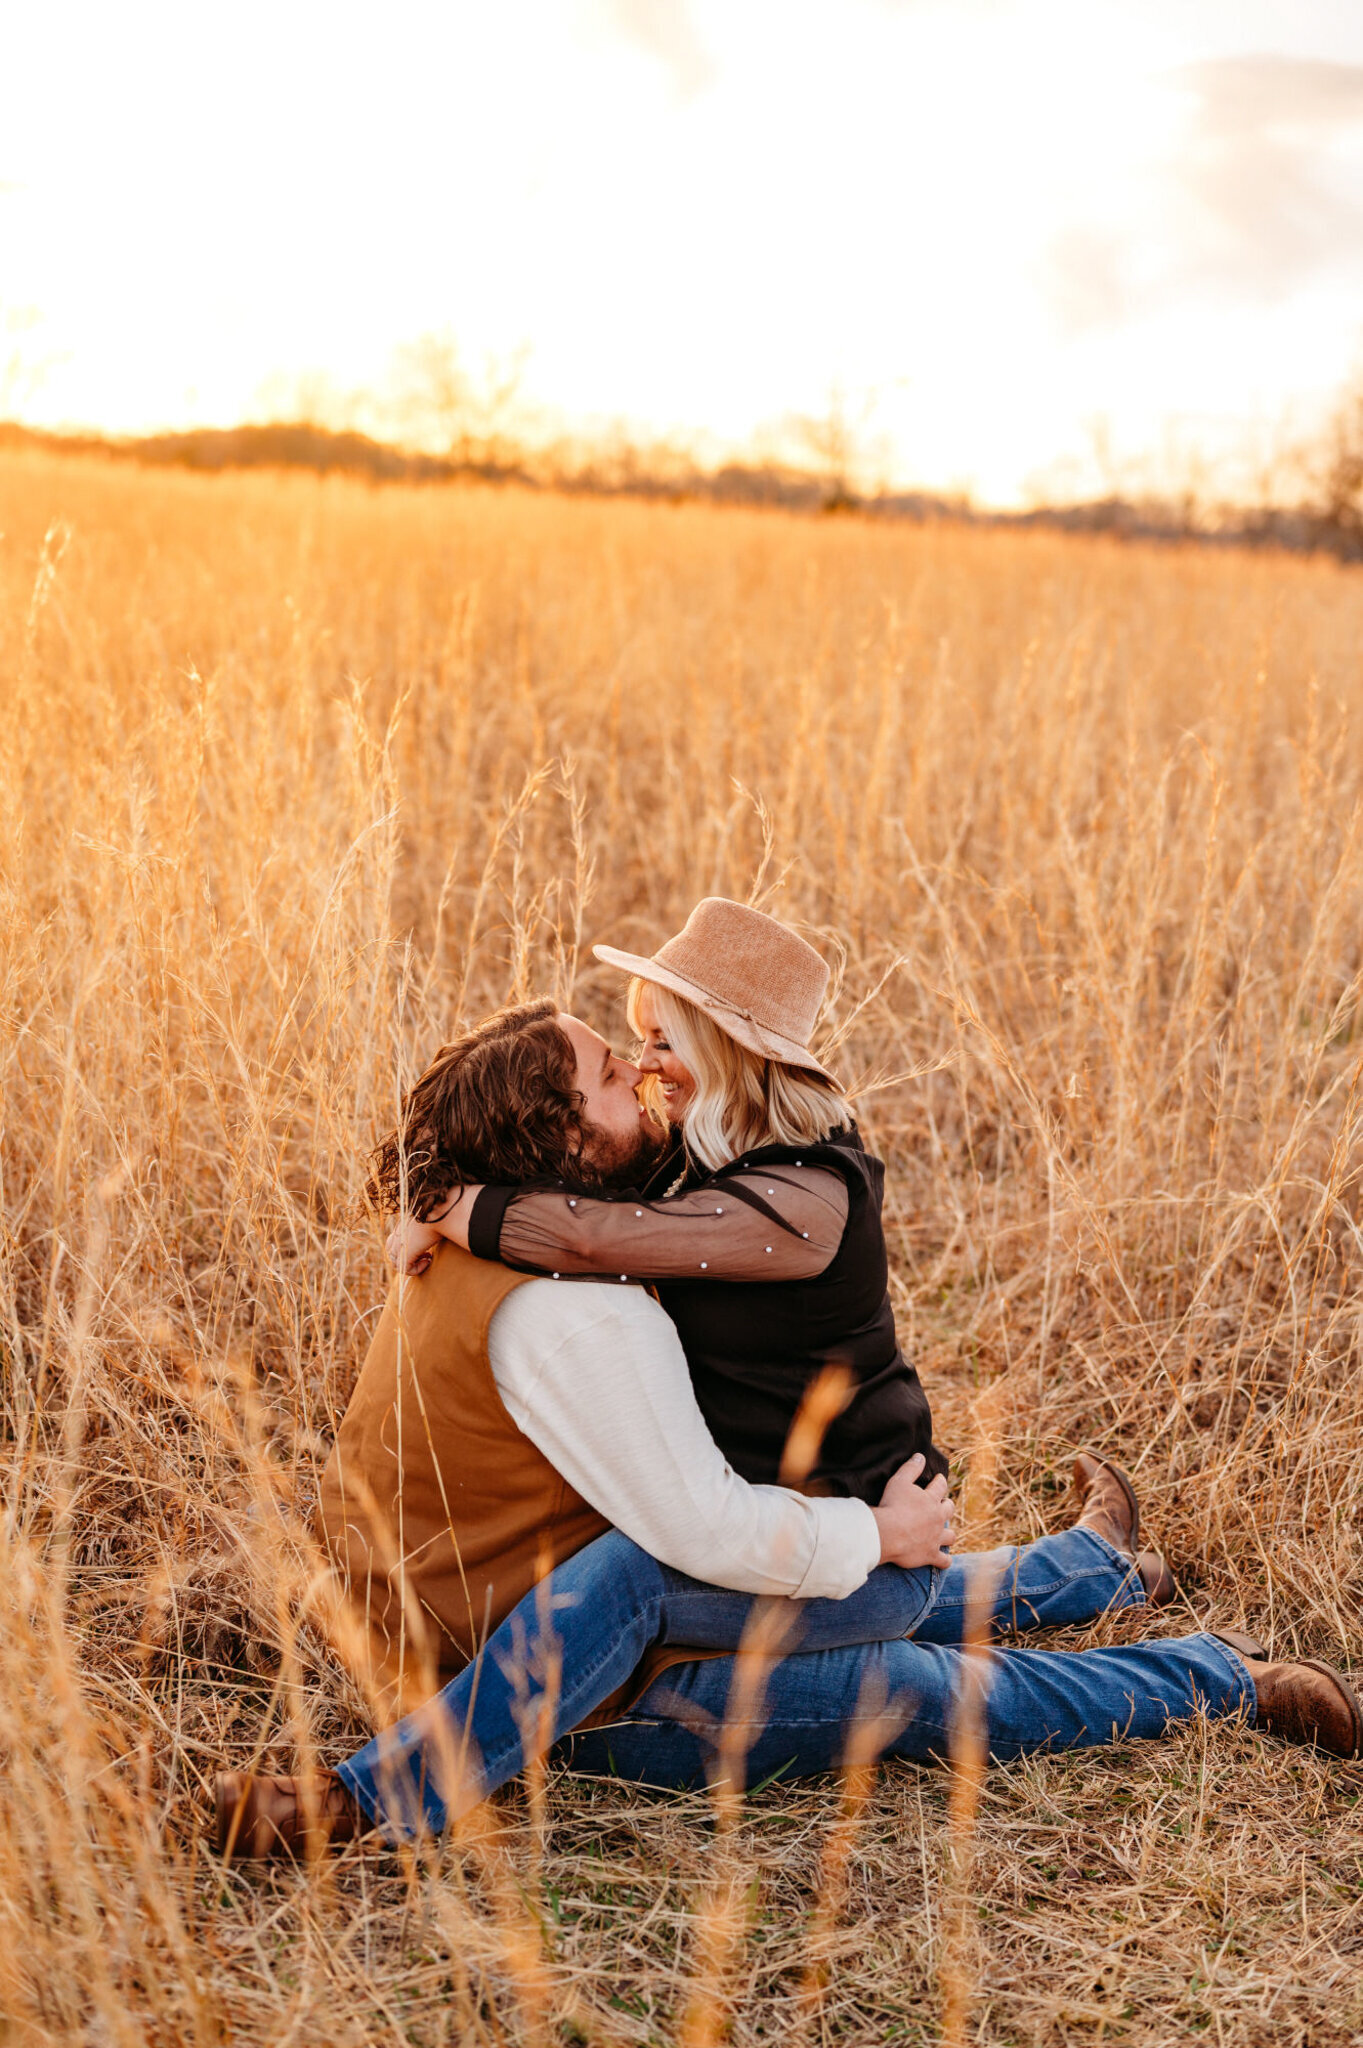 photo of man and woman cuddling in a field